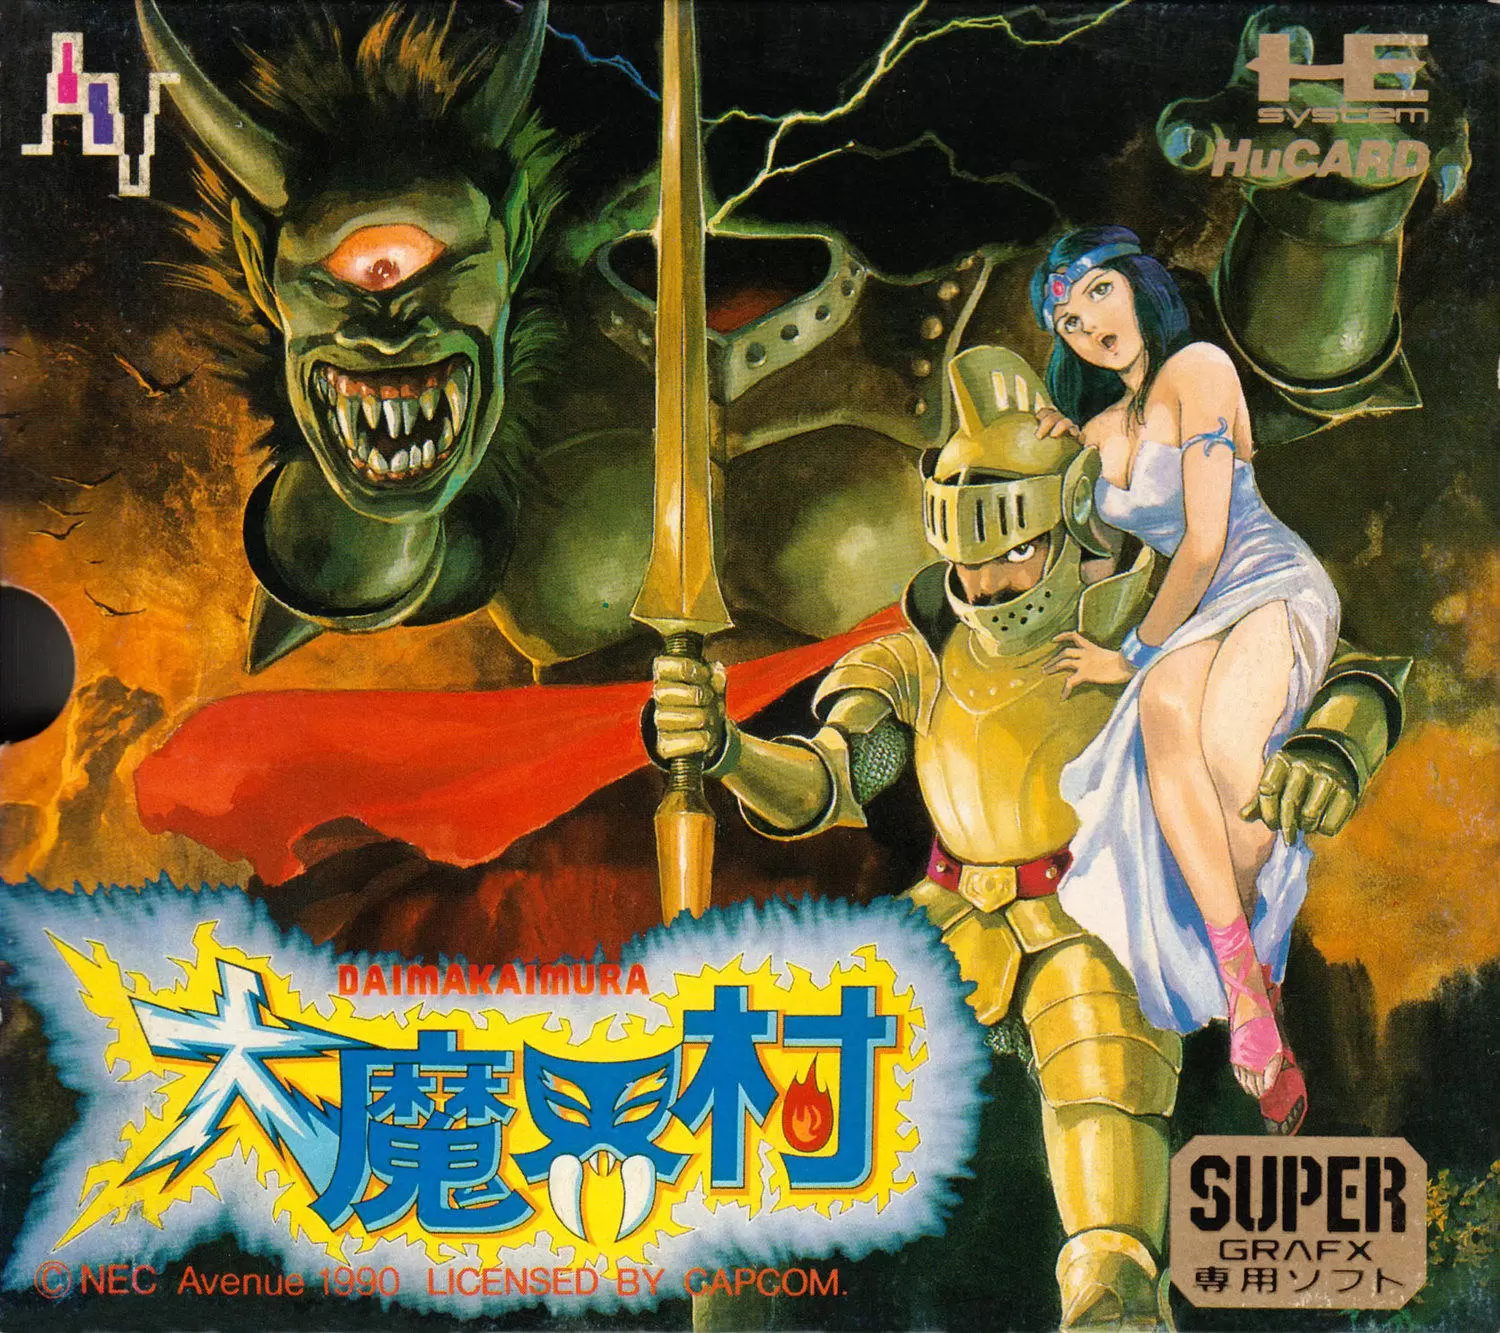 Turbo Grafx 16 (PC Engine) - Ghouls & Ghosts